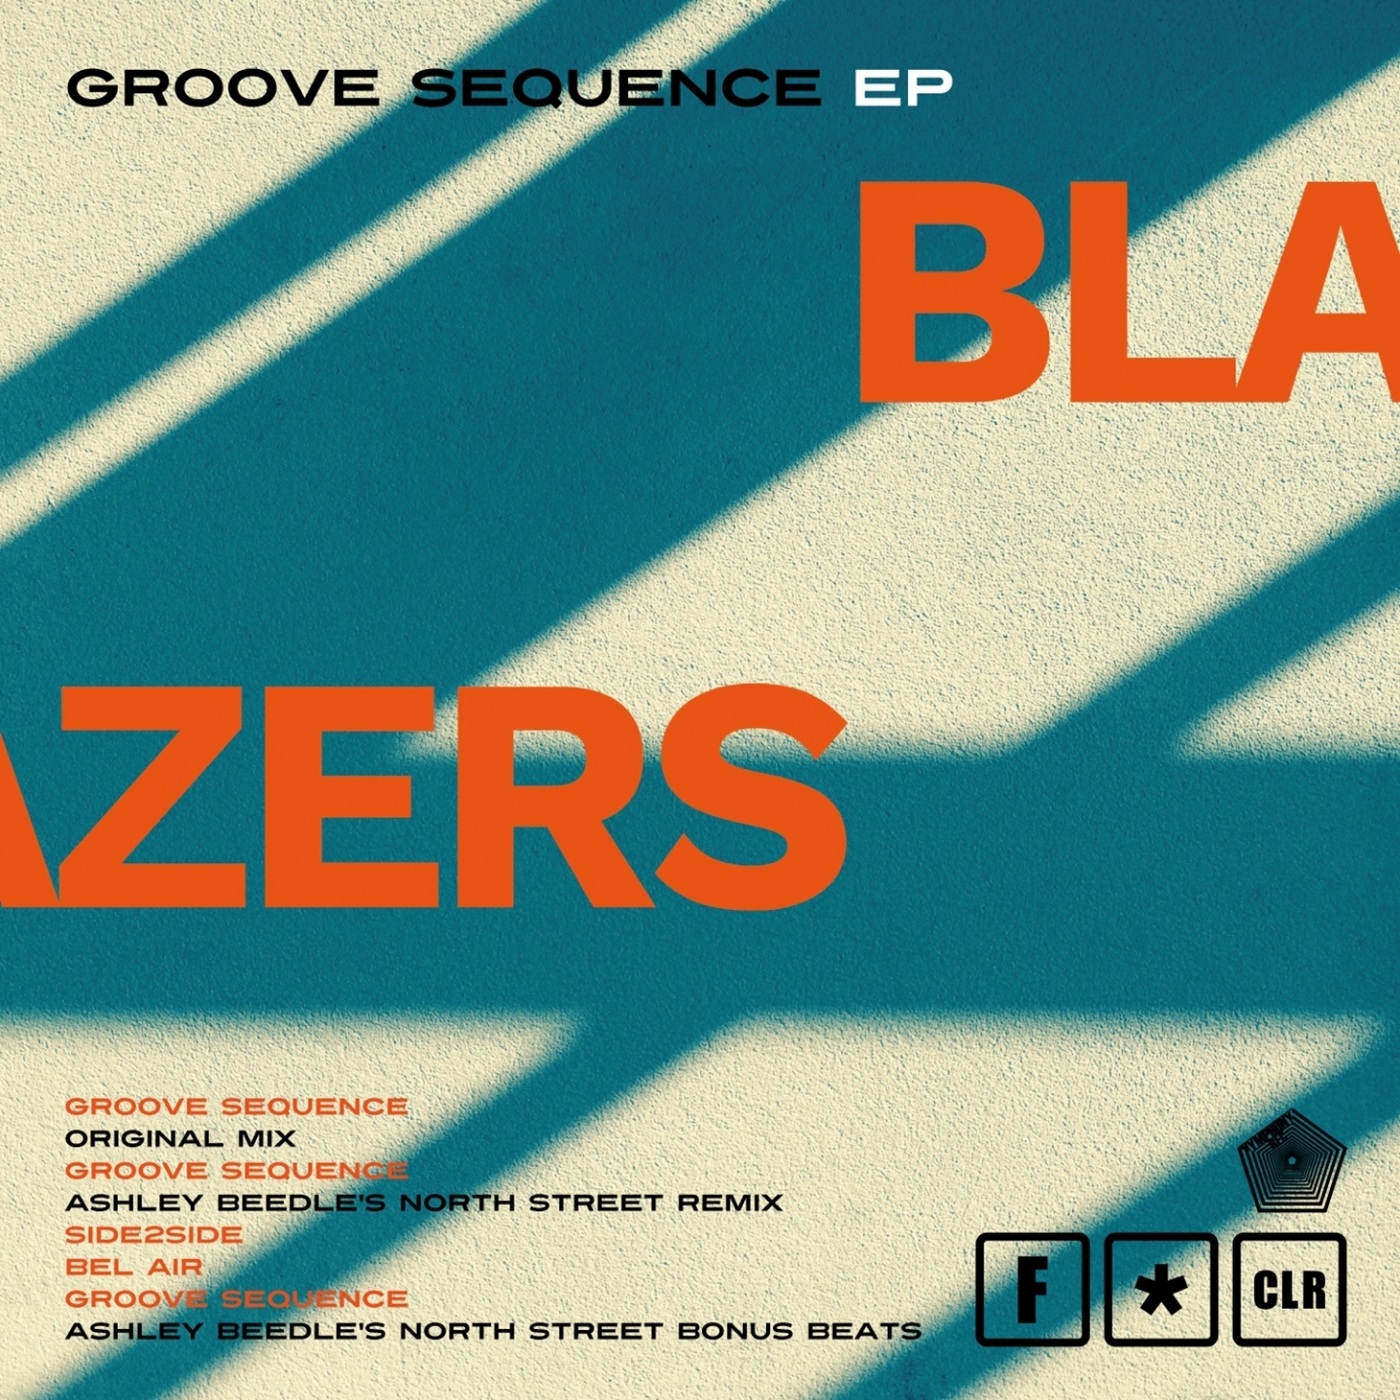 Blazers - Groove Sequence / F*CLR